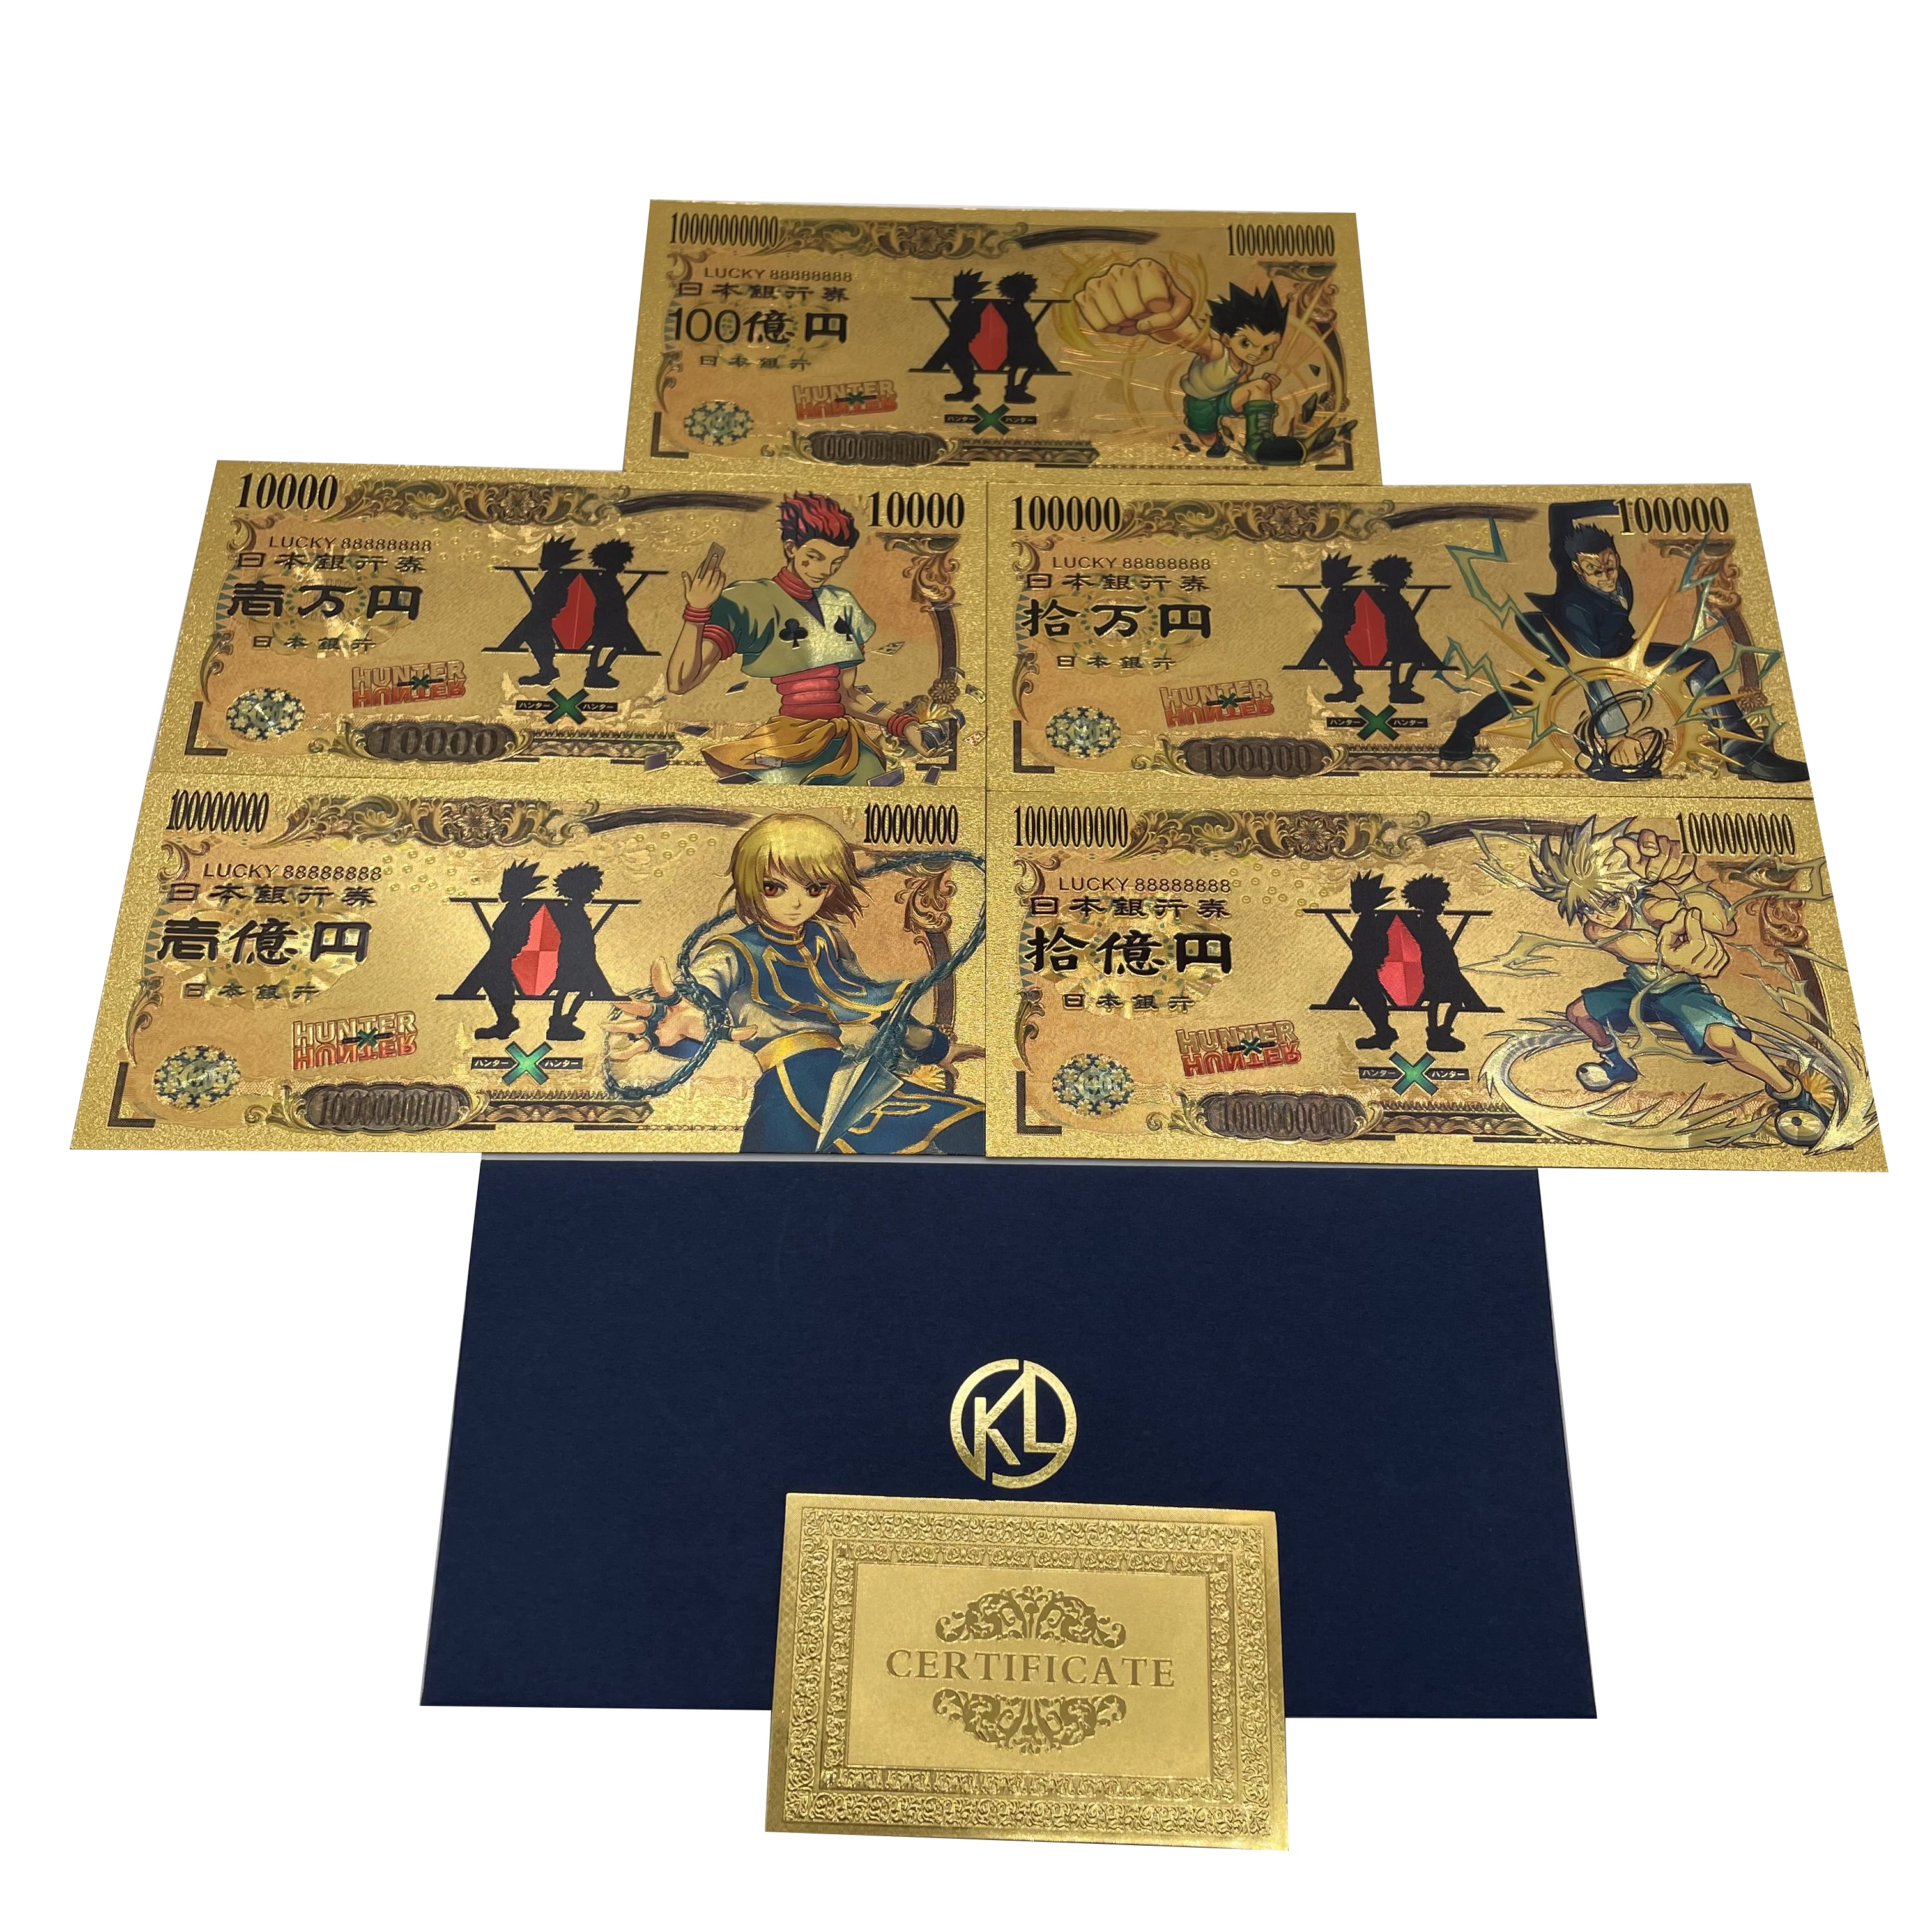 

Beautiful Japanese Manga Hunter X Hunter 10000 Yen Gold Anime Banknote for Classic Memory Souvenir Gifts and Collection Cards